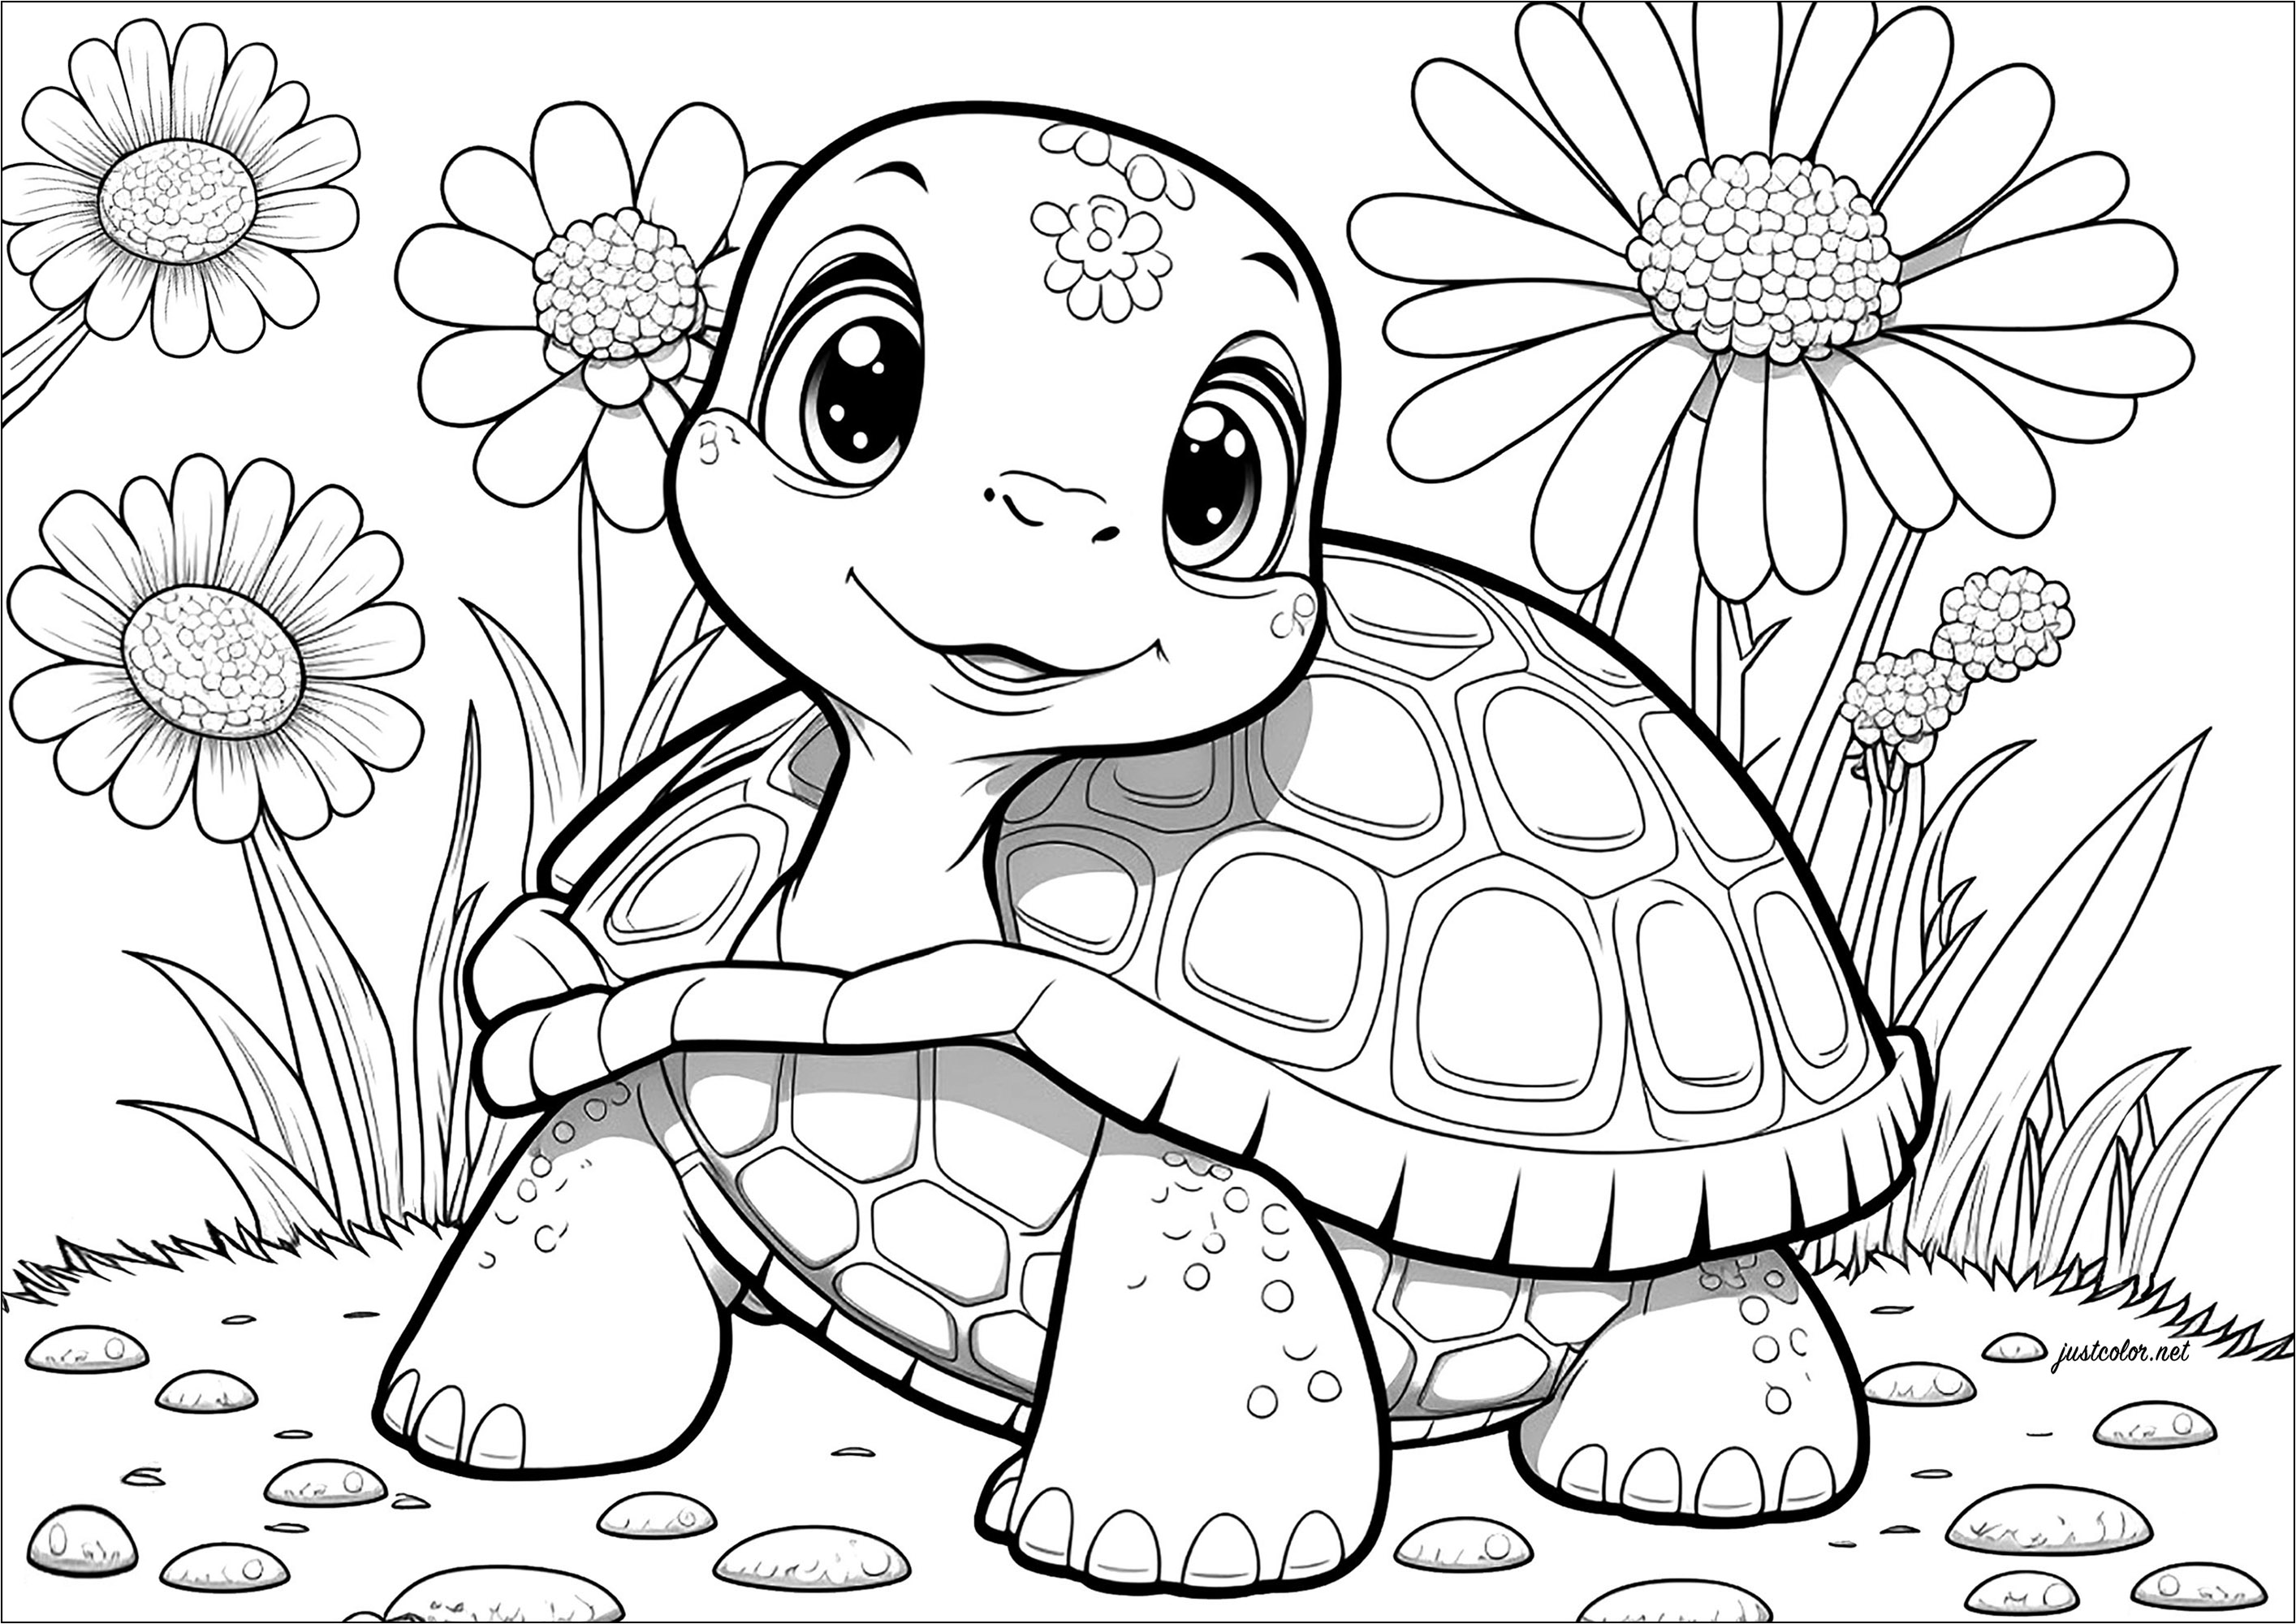 cute baby turtle coloring pages